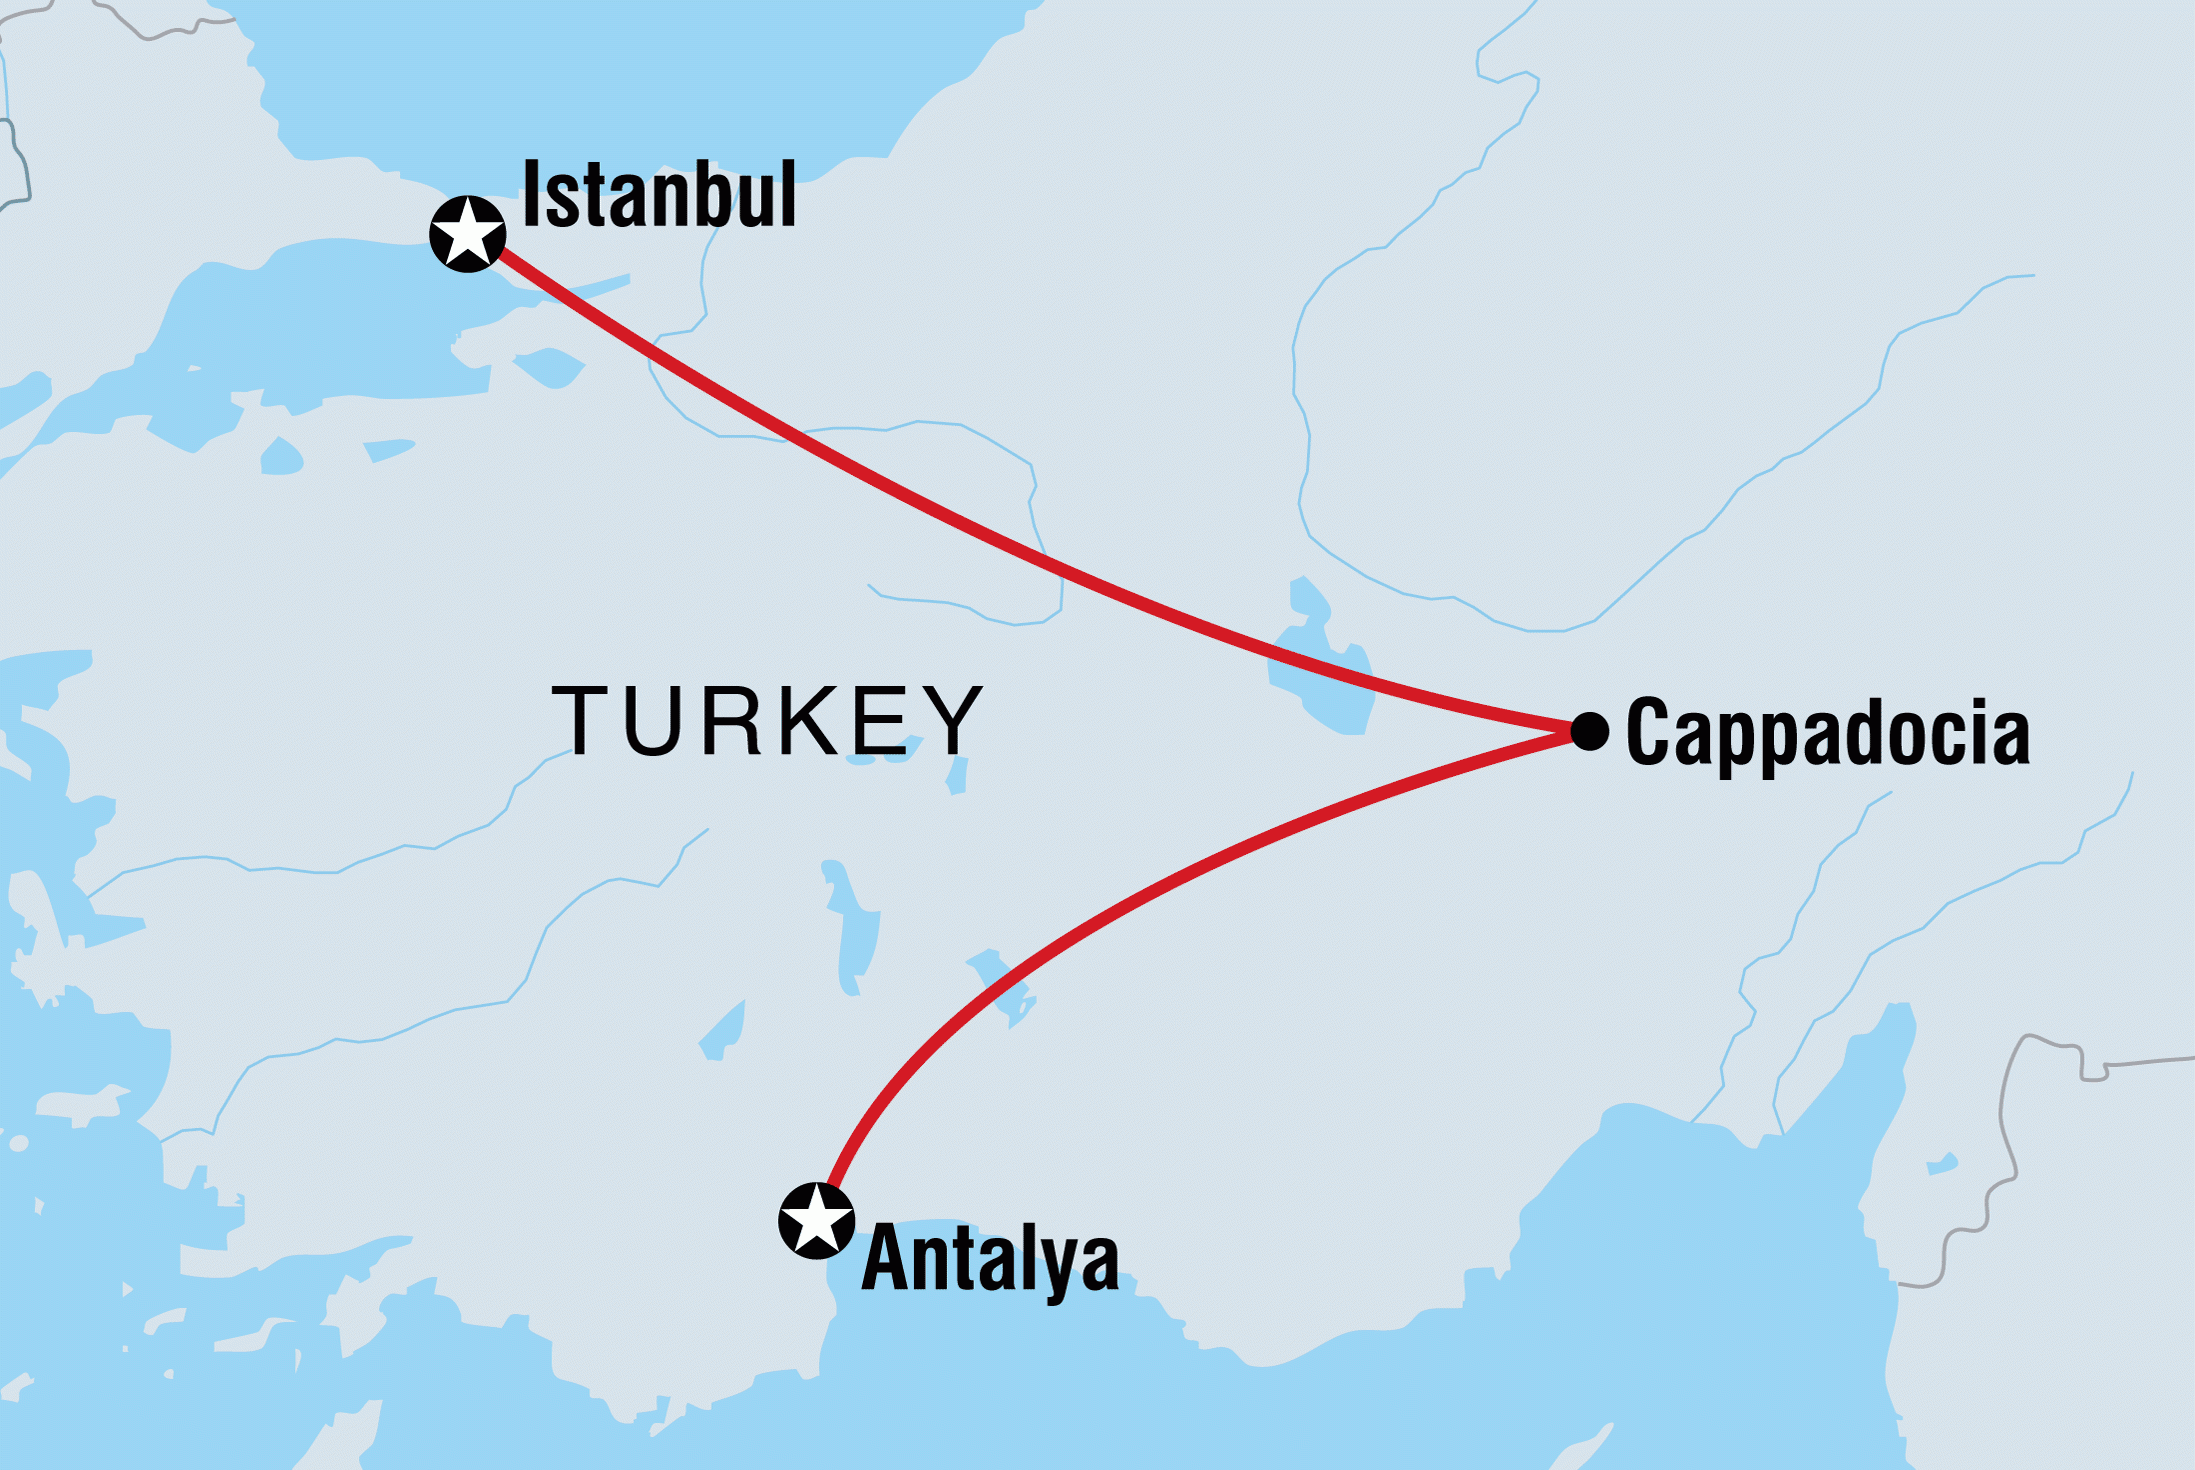 Map from Istanbul to Cappadocia